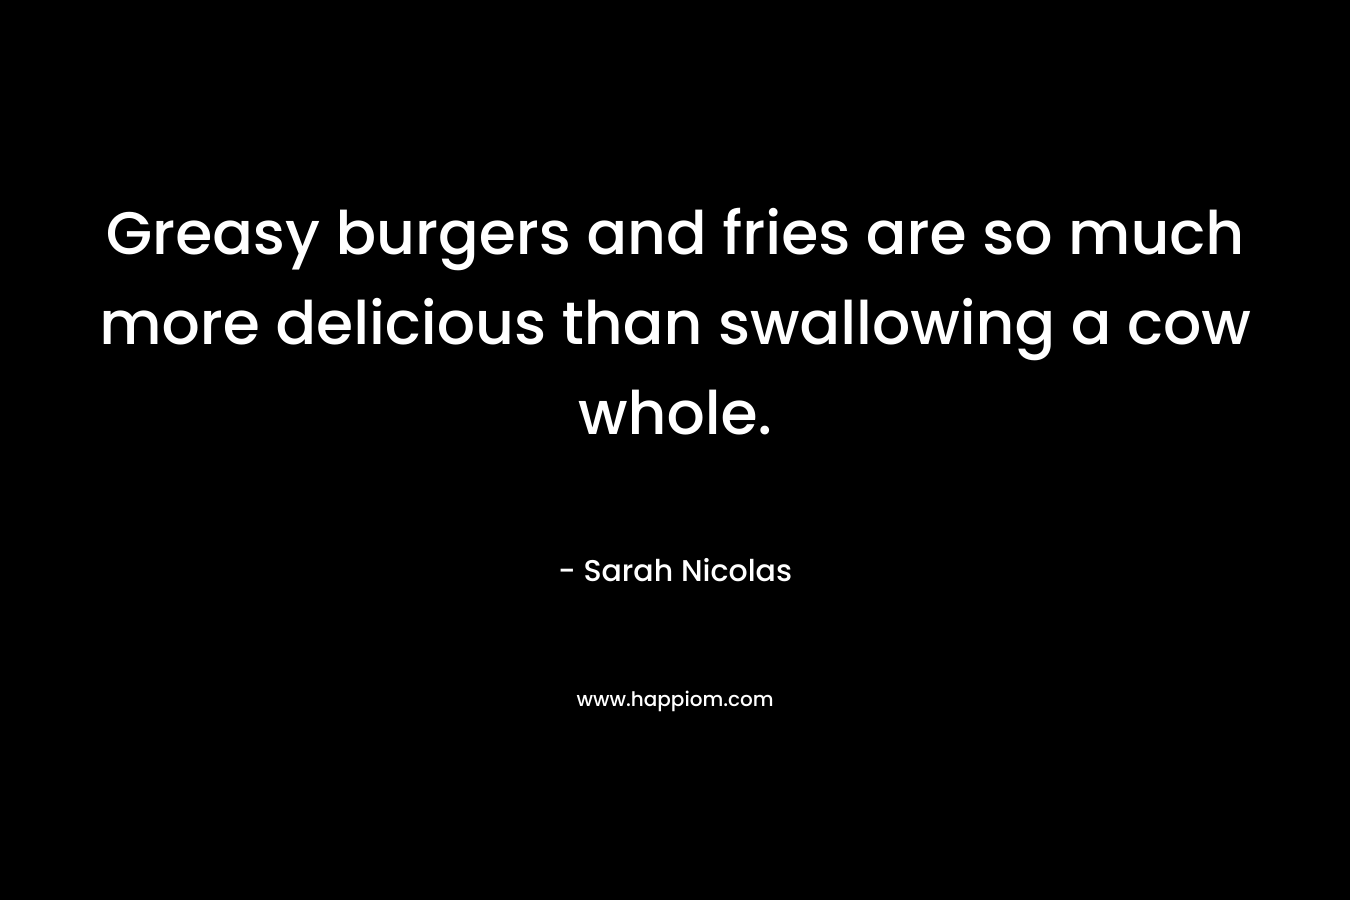 Greasy burgers and fries are so much more delicious than swallowing a cow whole. – Sarah Nicolas